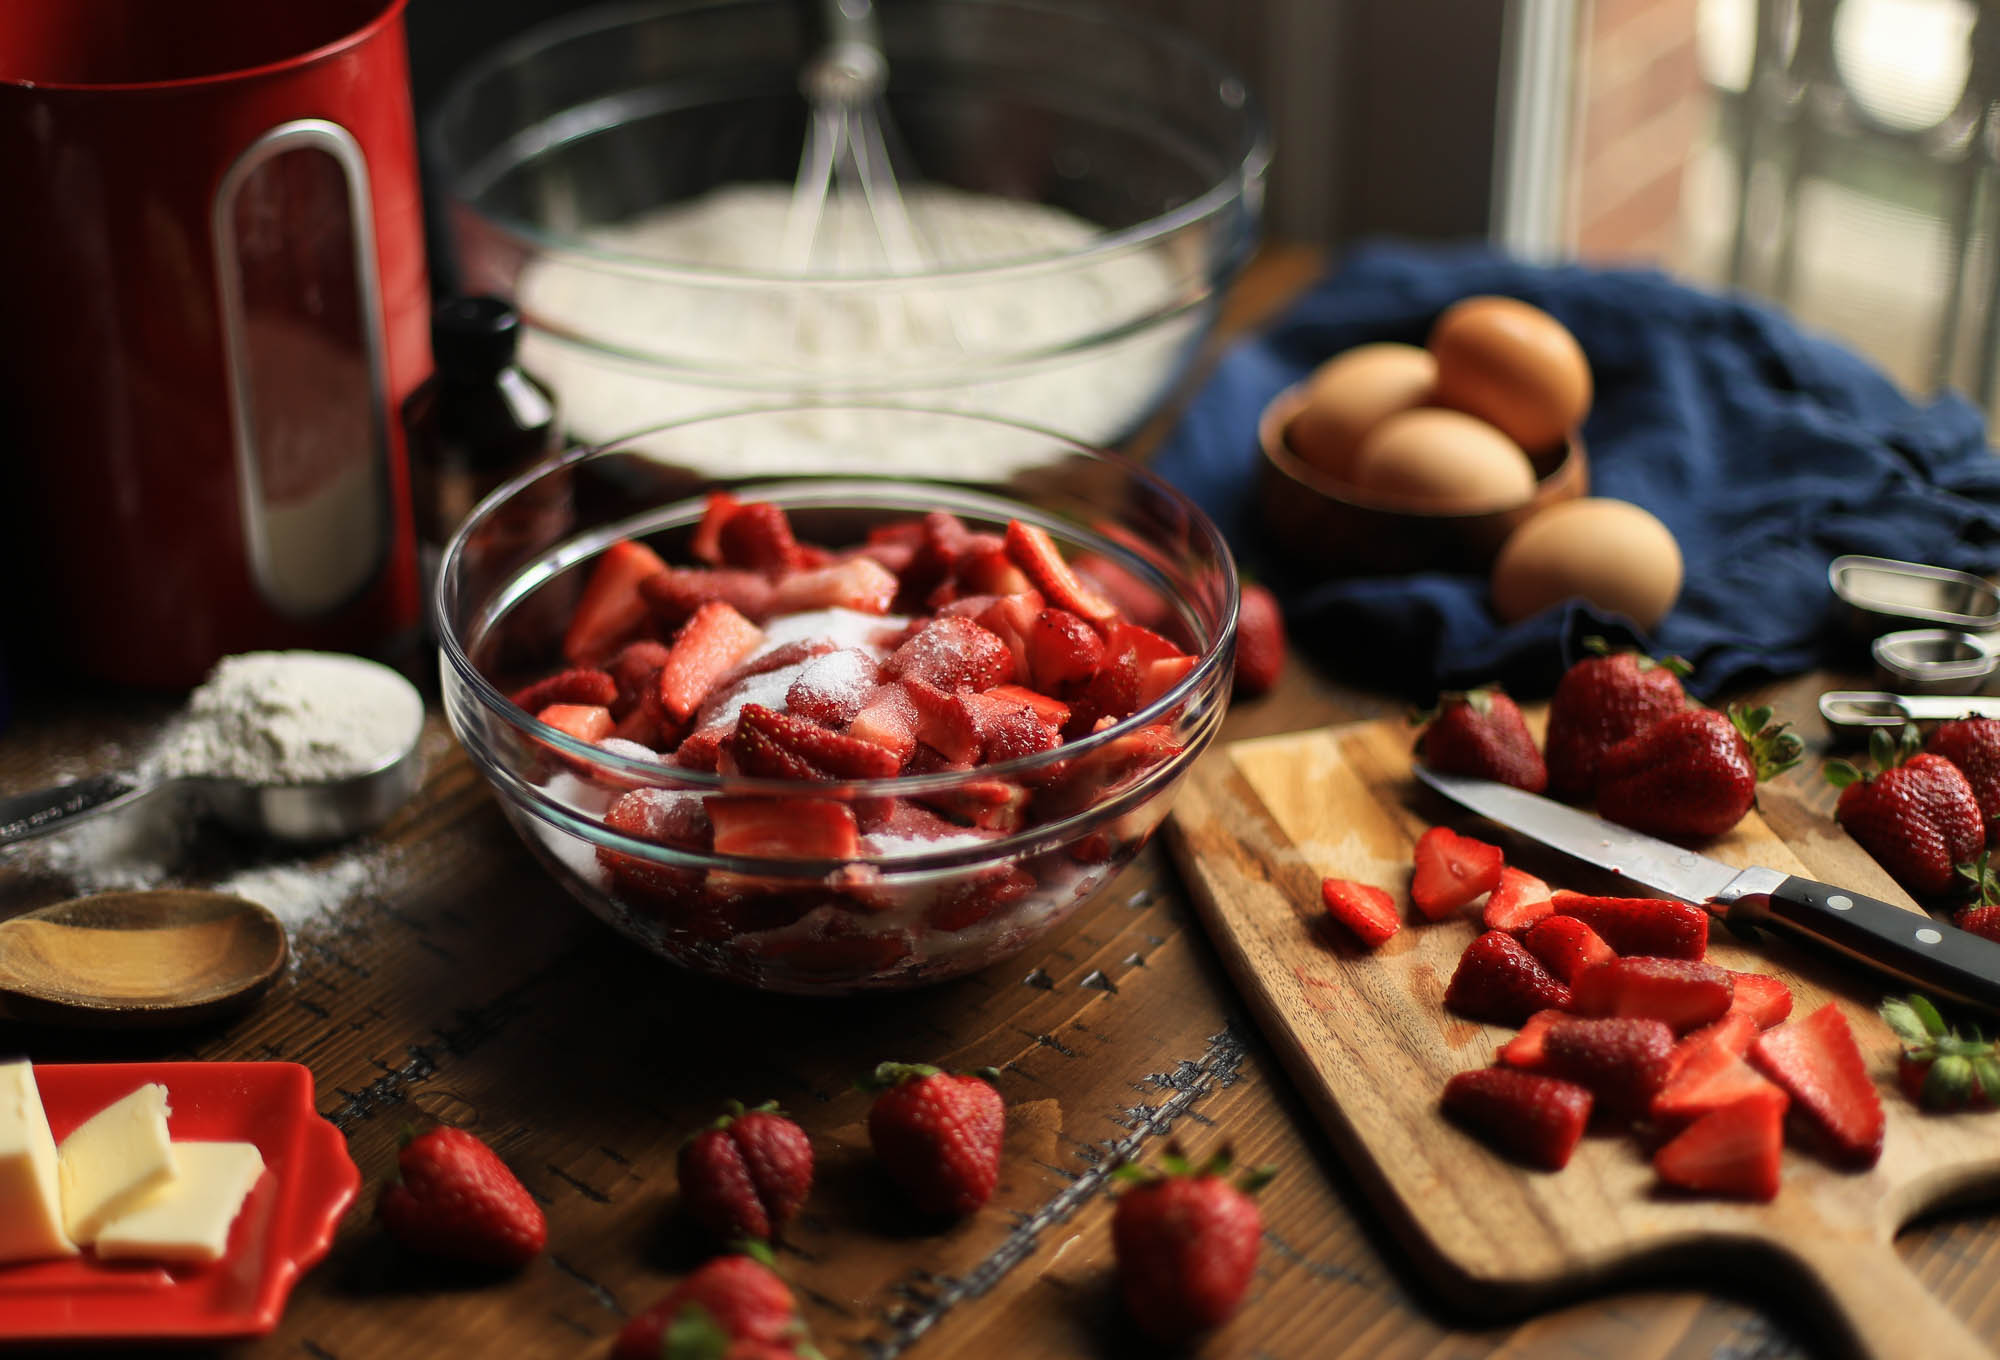 The Best Strawberry Shortcake Recipe by The District Table